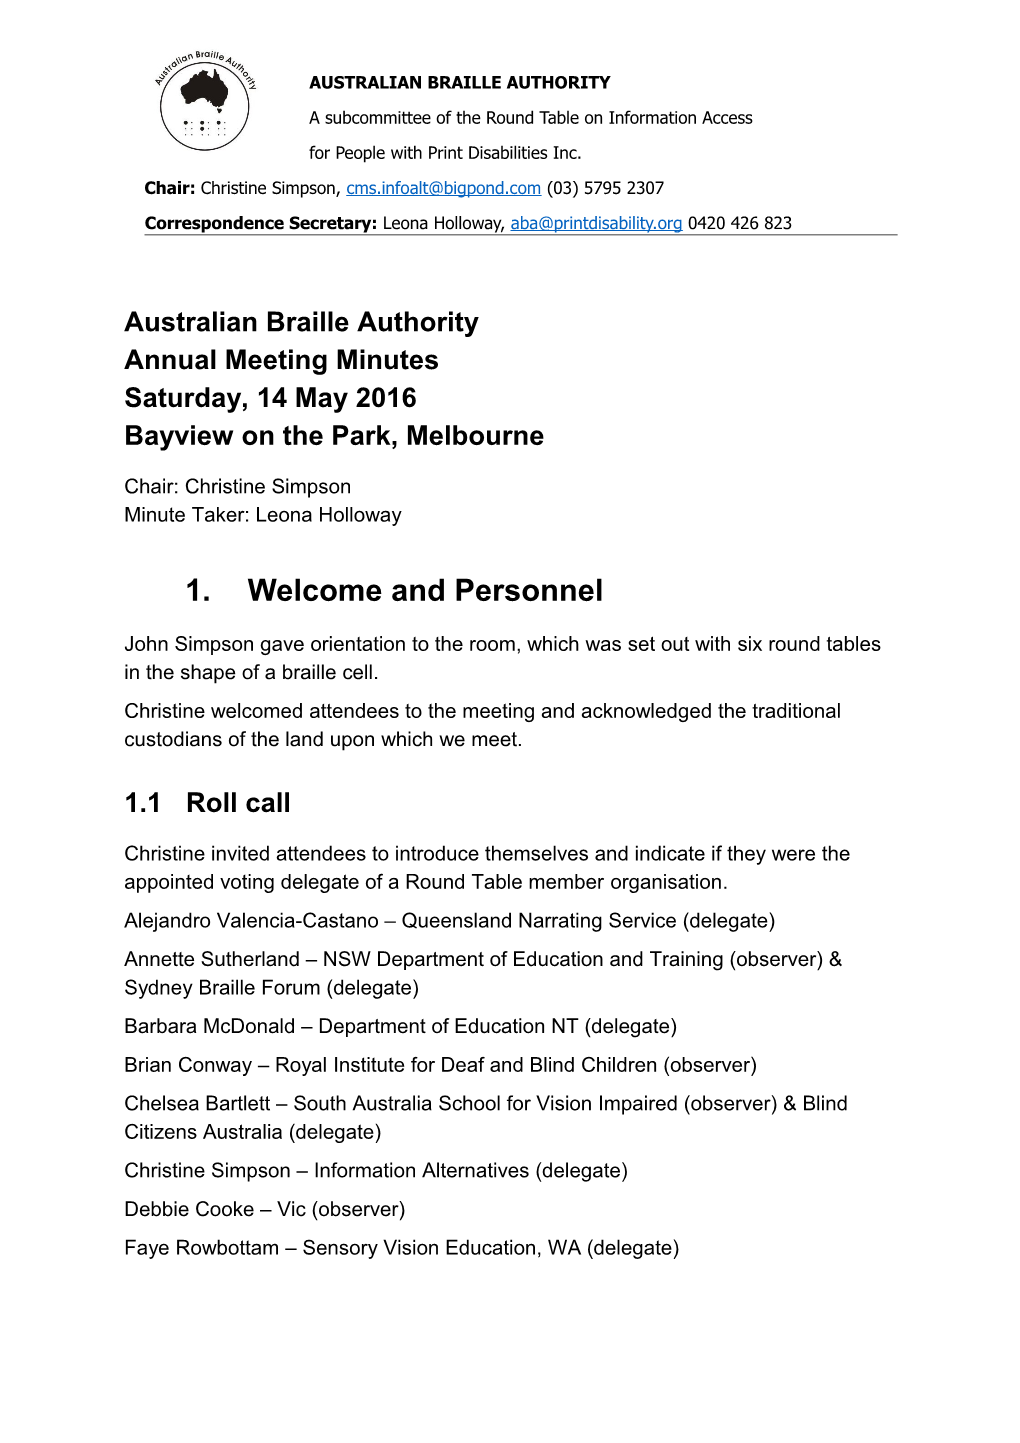 Australian Braille Authorityannual Meeting Minutessaturday, 14May2016bayview on the Park